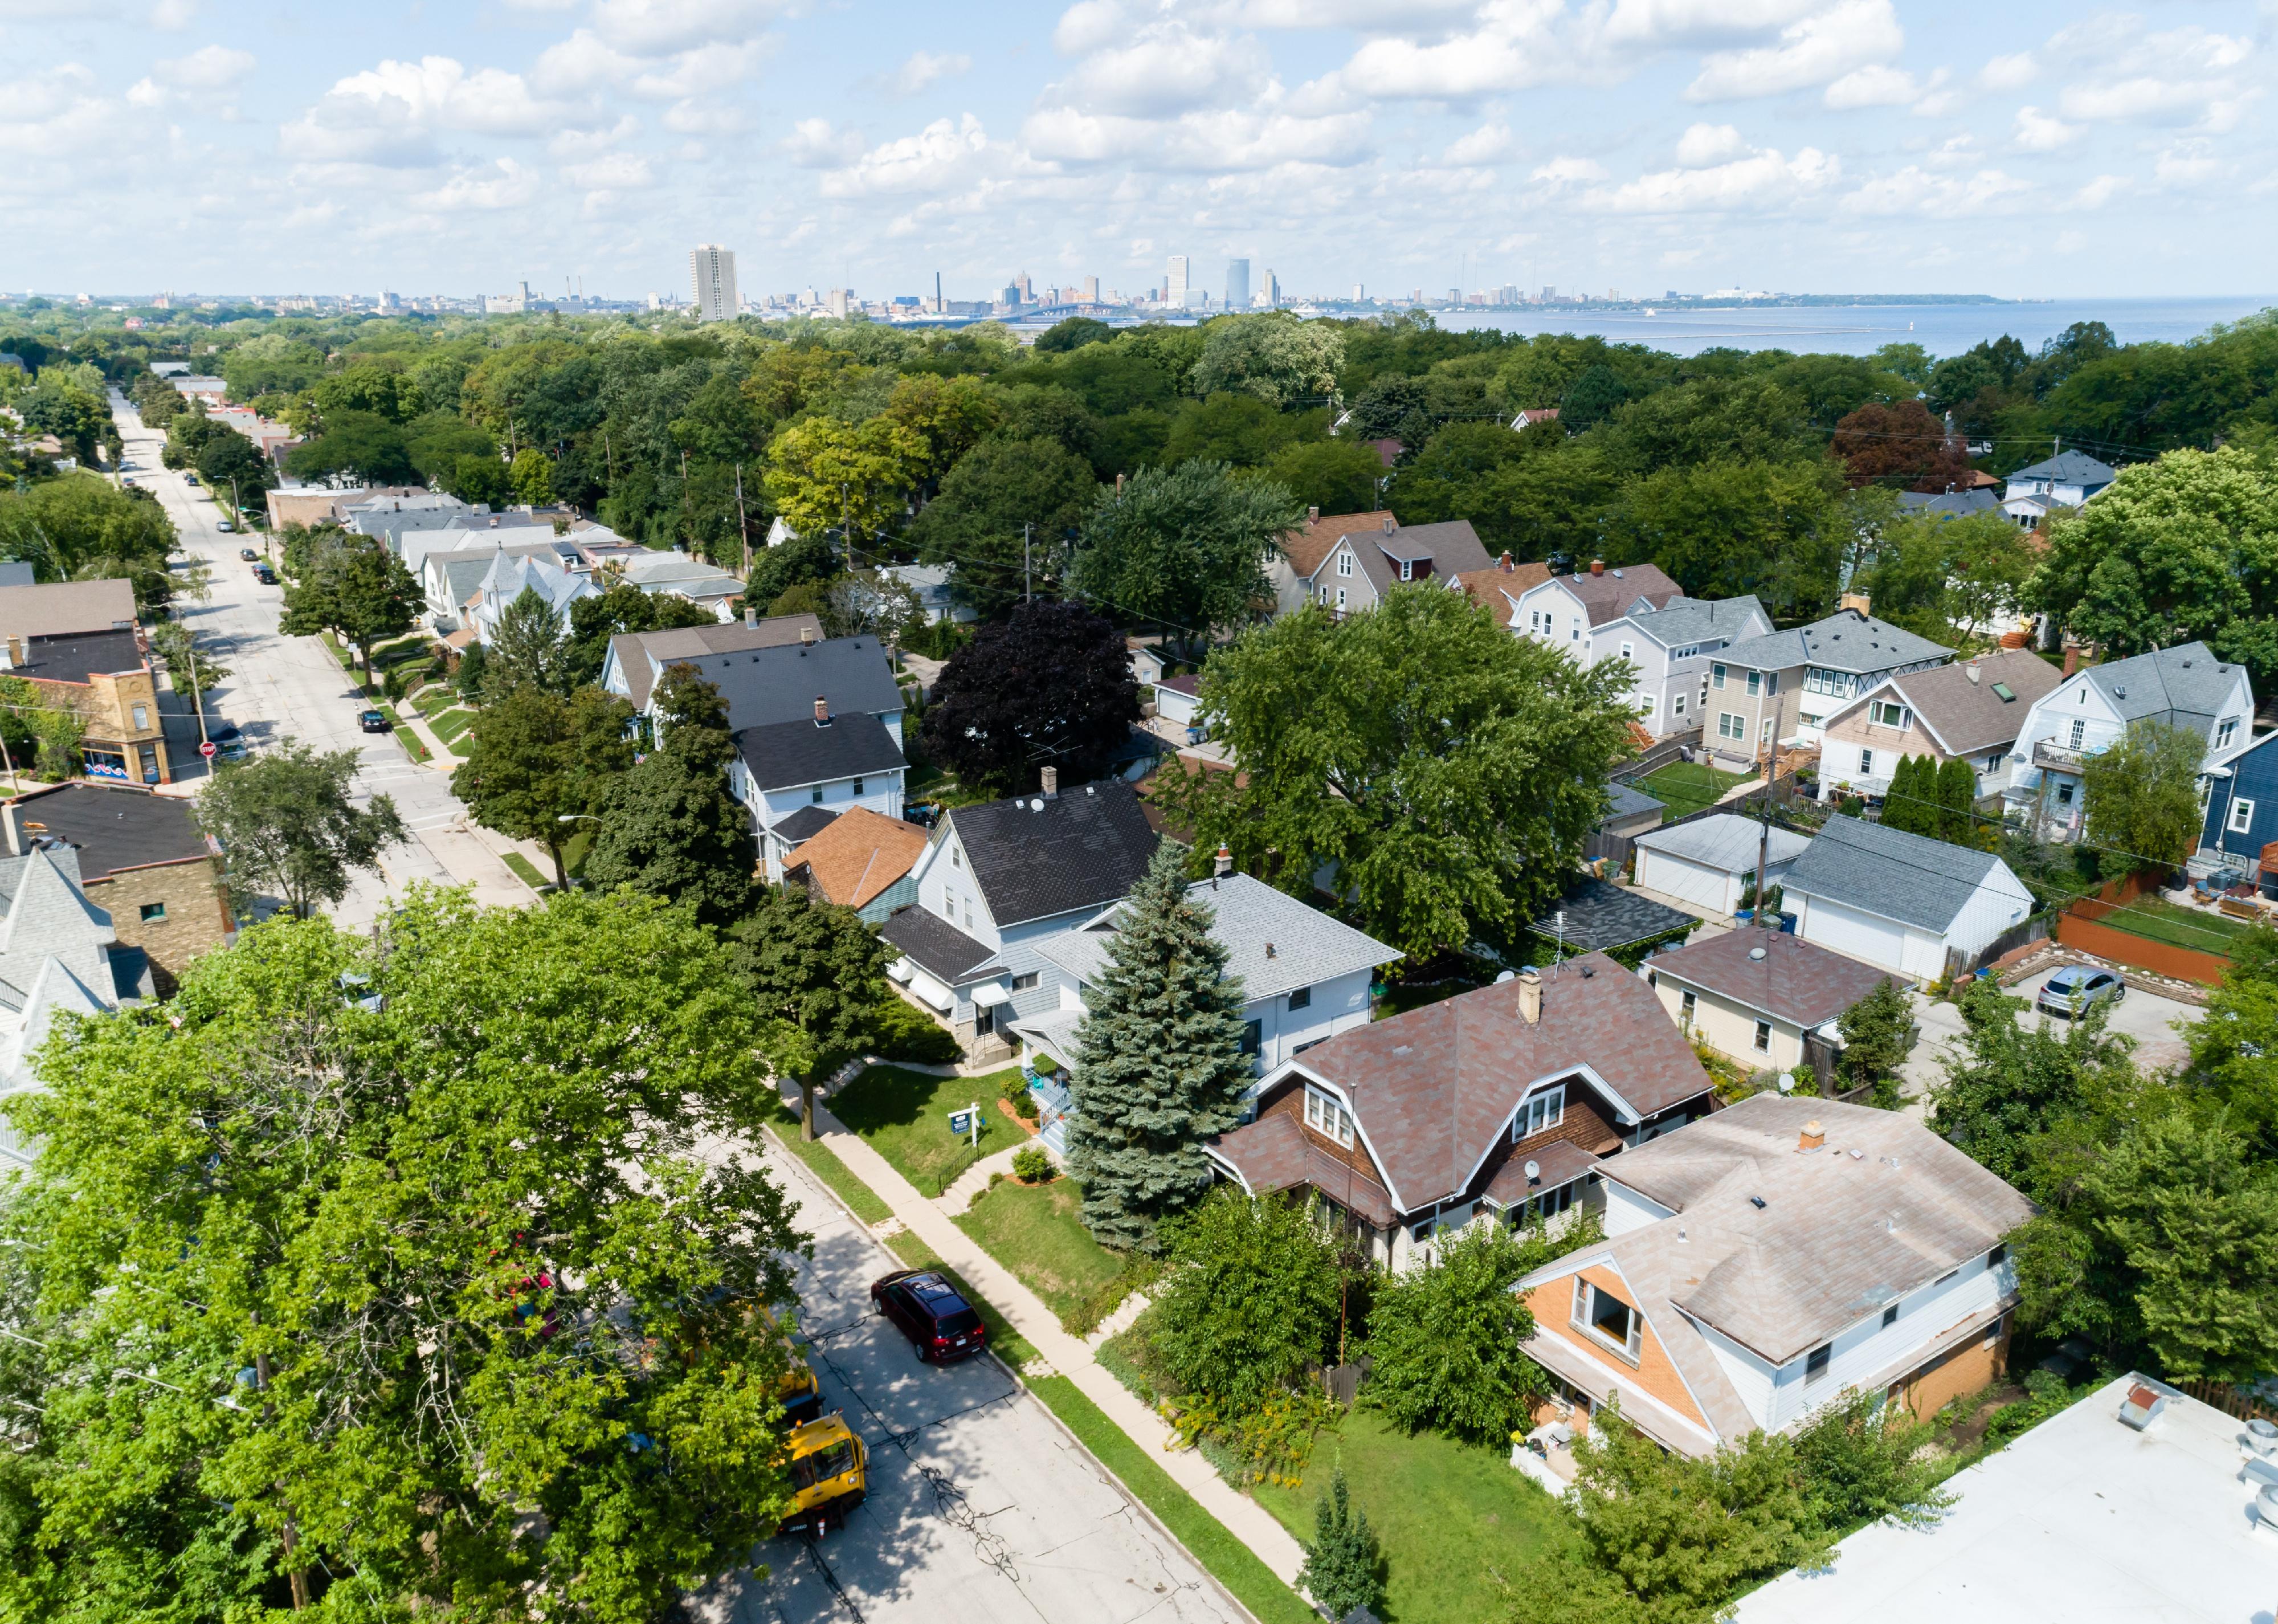 Aerial of a neighborhood in Bayview, Wisconsin.